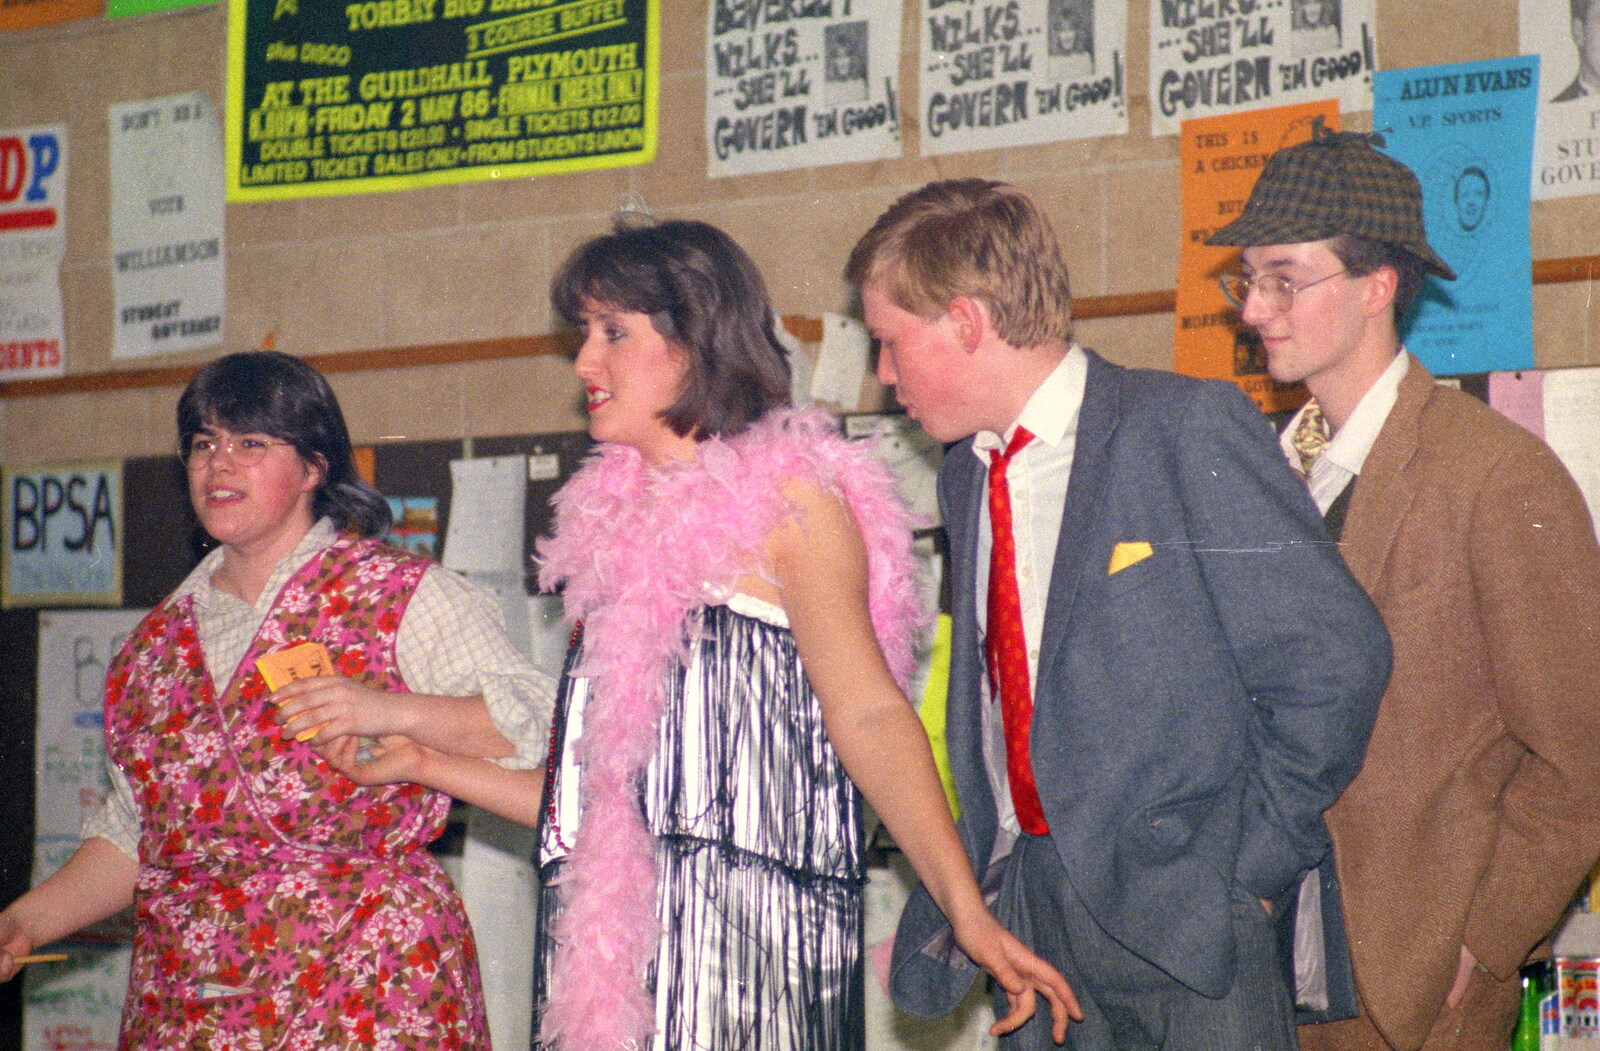 The BABS amateur dramatic players on stage from Uni: The End of Term and Whitsand Bay, Plymouth and New Milton - 21st March 1986